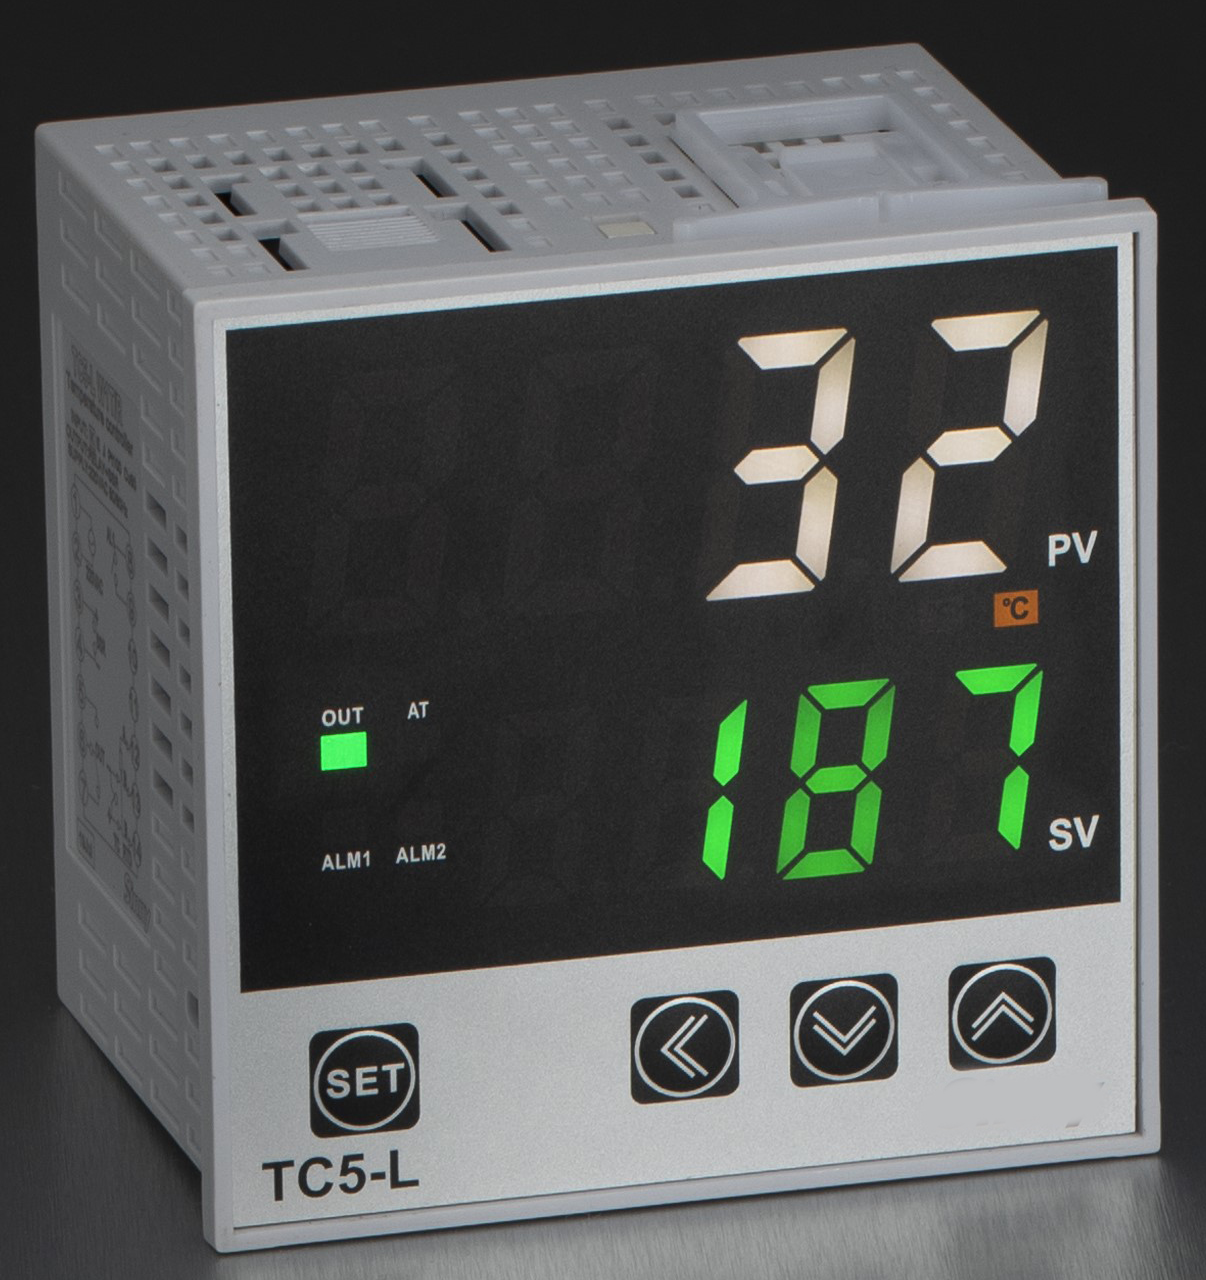 FC5-L-1U-1-G-4-C PID Controller, 24VDC with 1 Alarm, RS485, K,E,J,N,T,S,R,B Thermocouple, Linear Current/Voltage and  PT100/Cu20 RTD Input, 96x96mm,0-10V Output